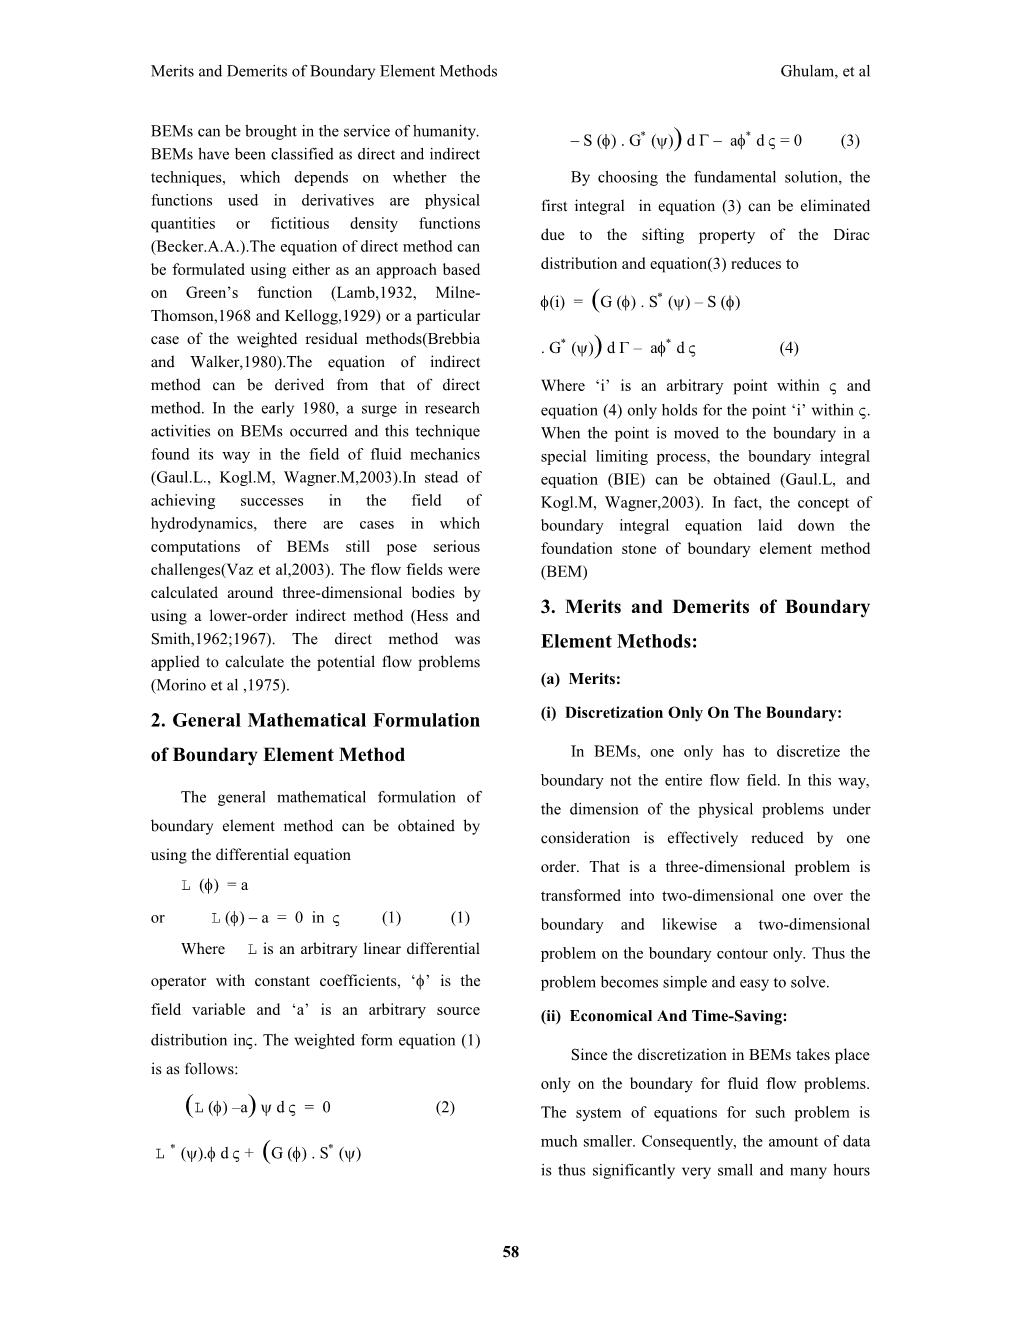 Merits and Demerits of Boundary Element Method for Incompressible Fluid Flow Problems